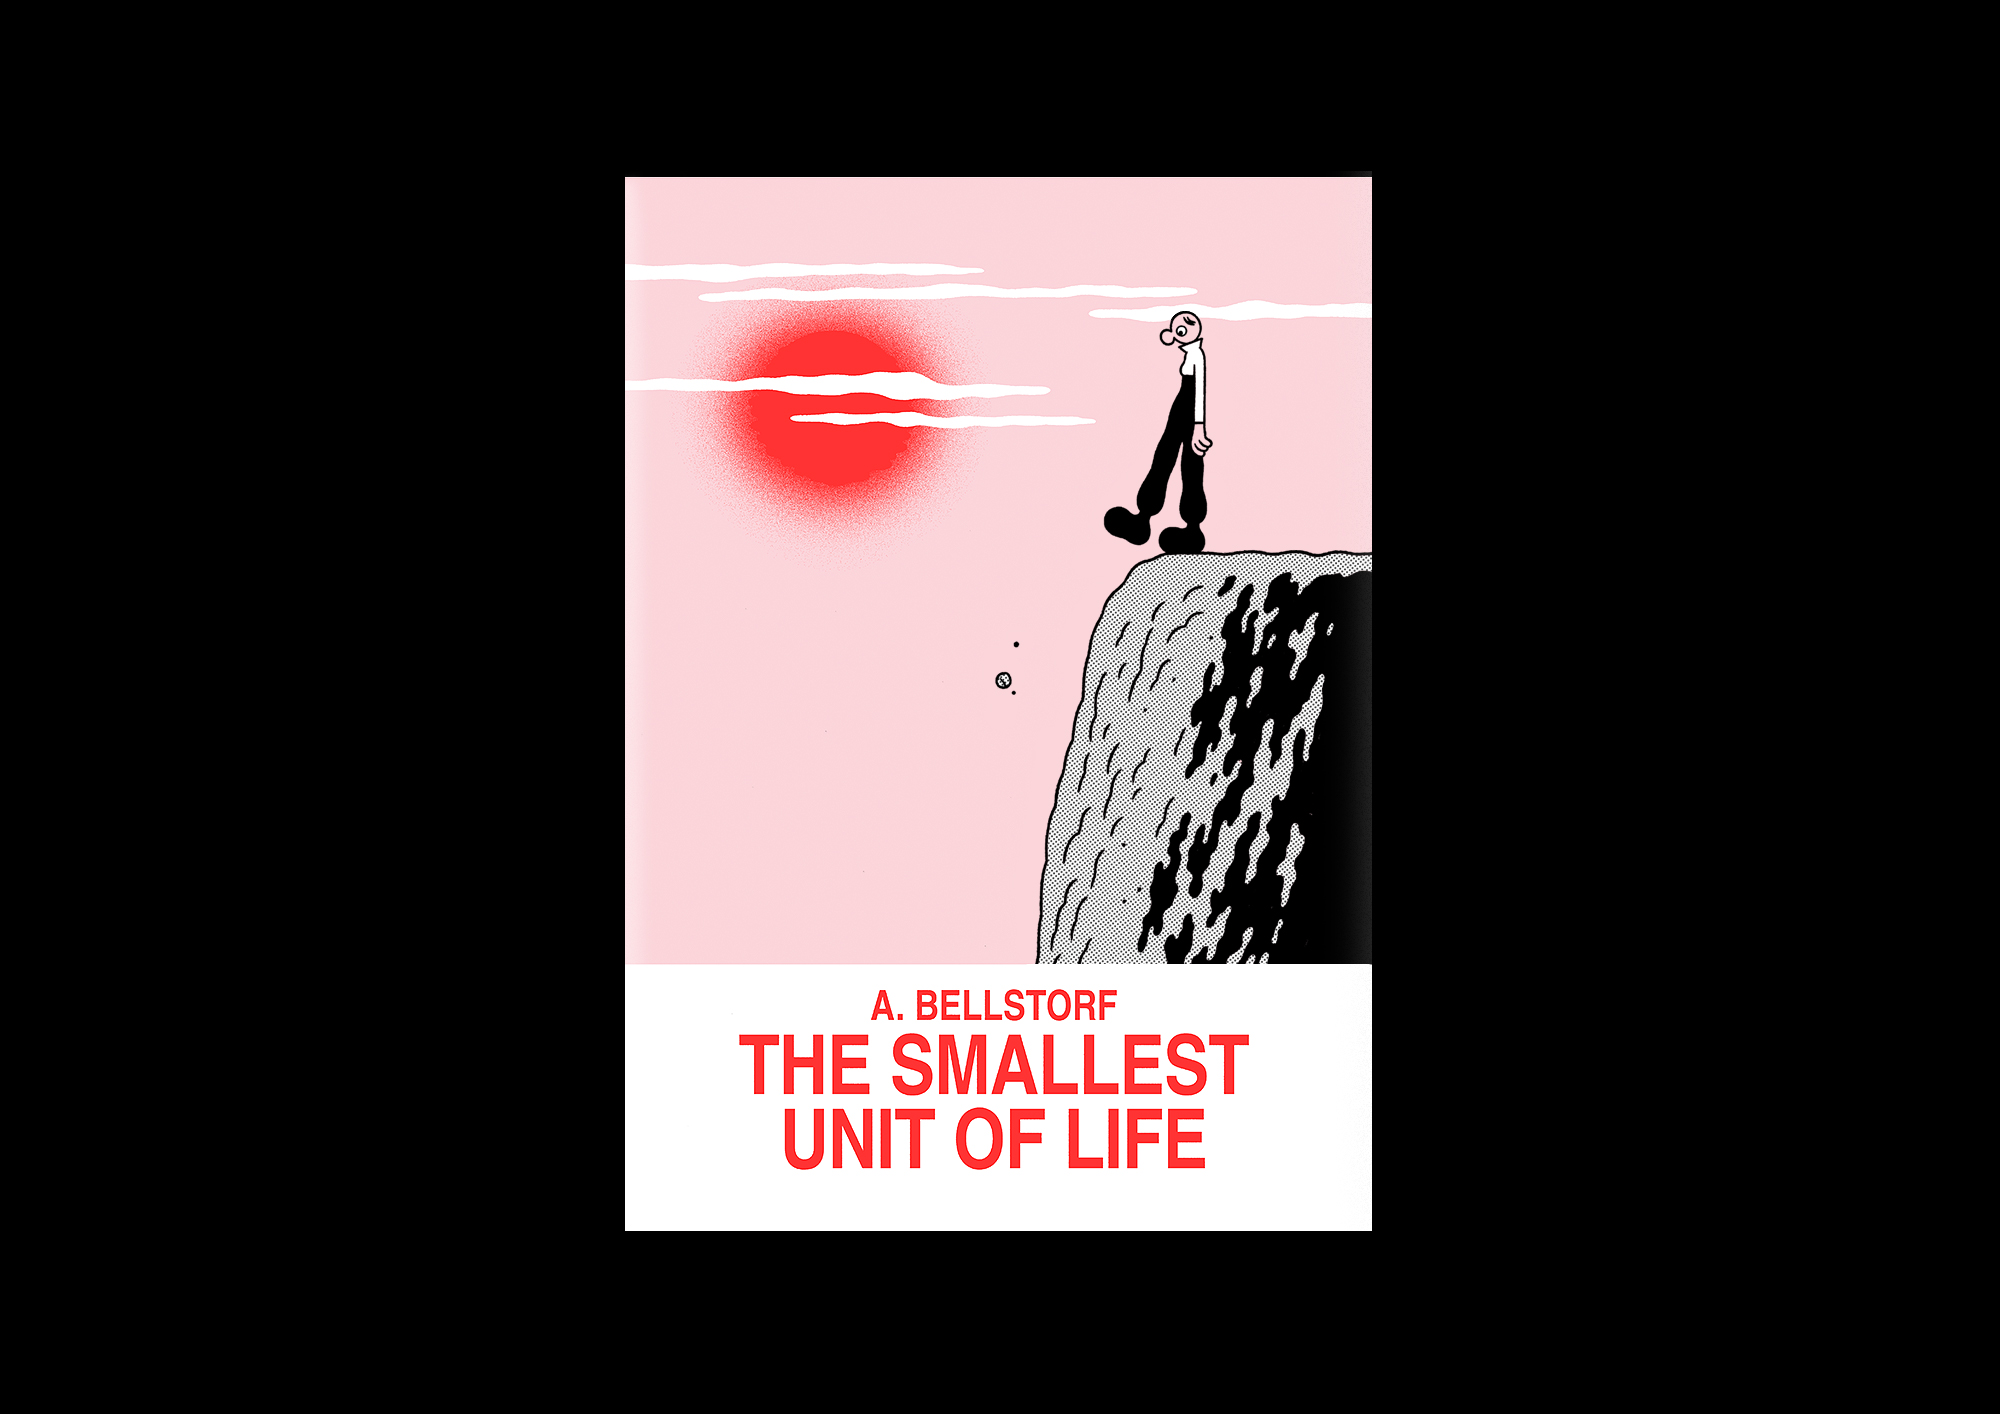 The Smallest Unit of Life